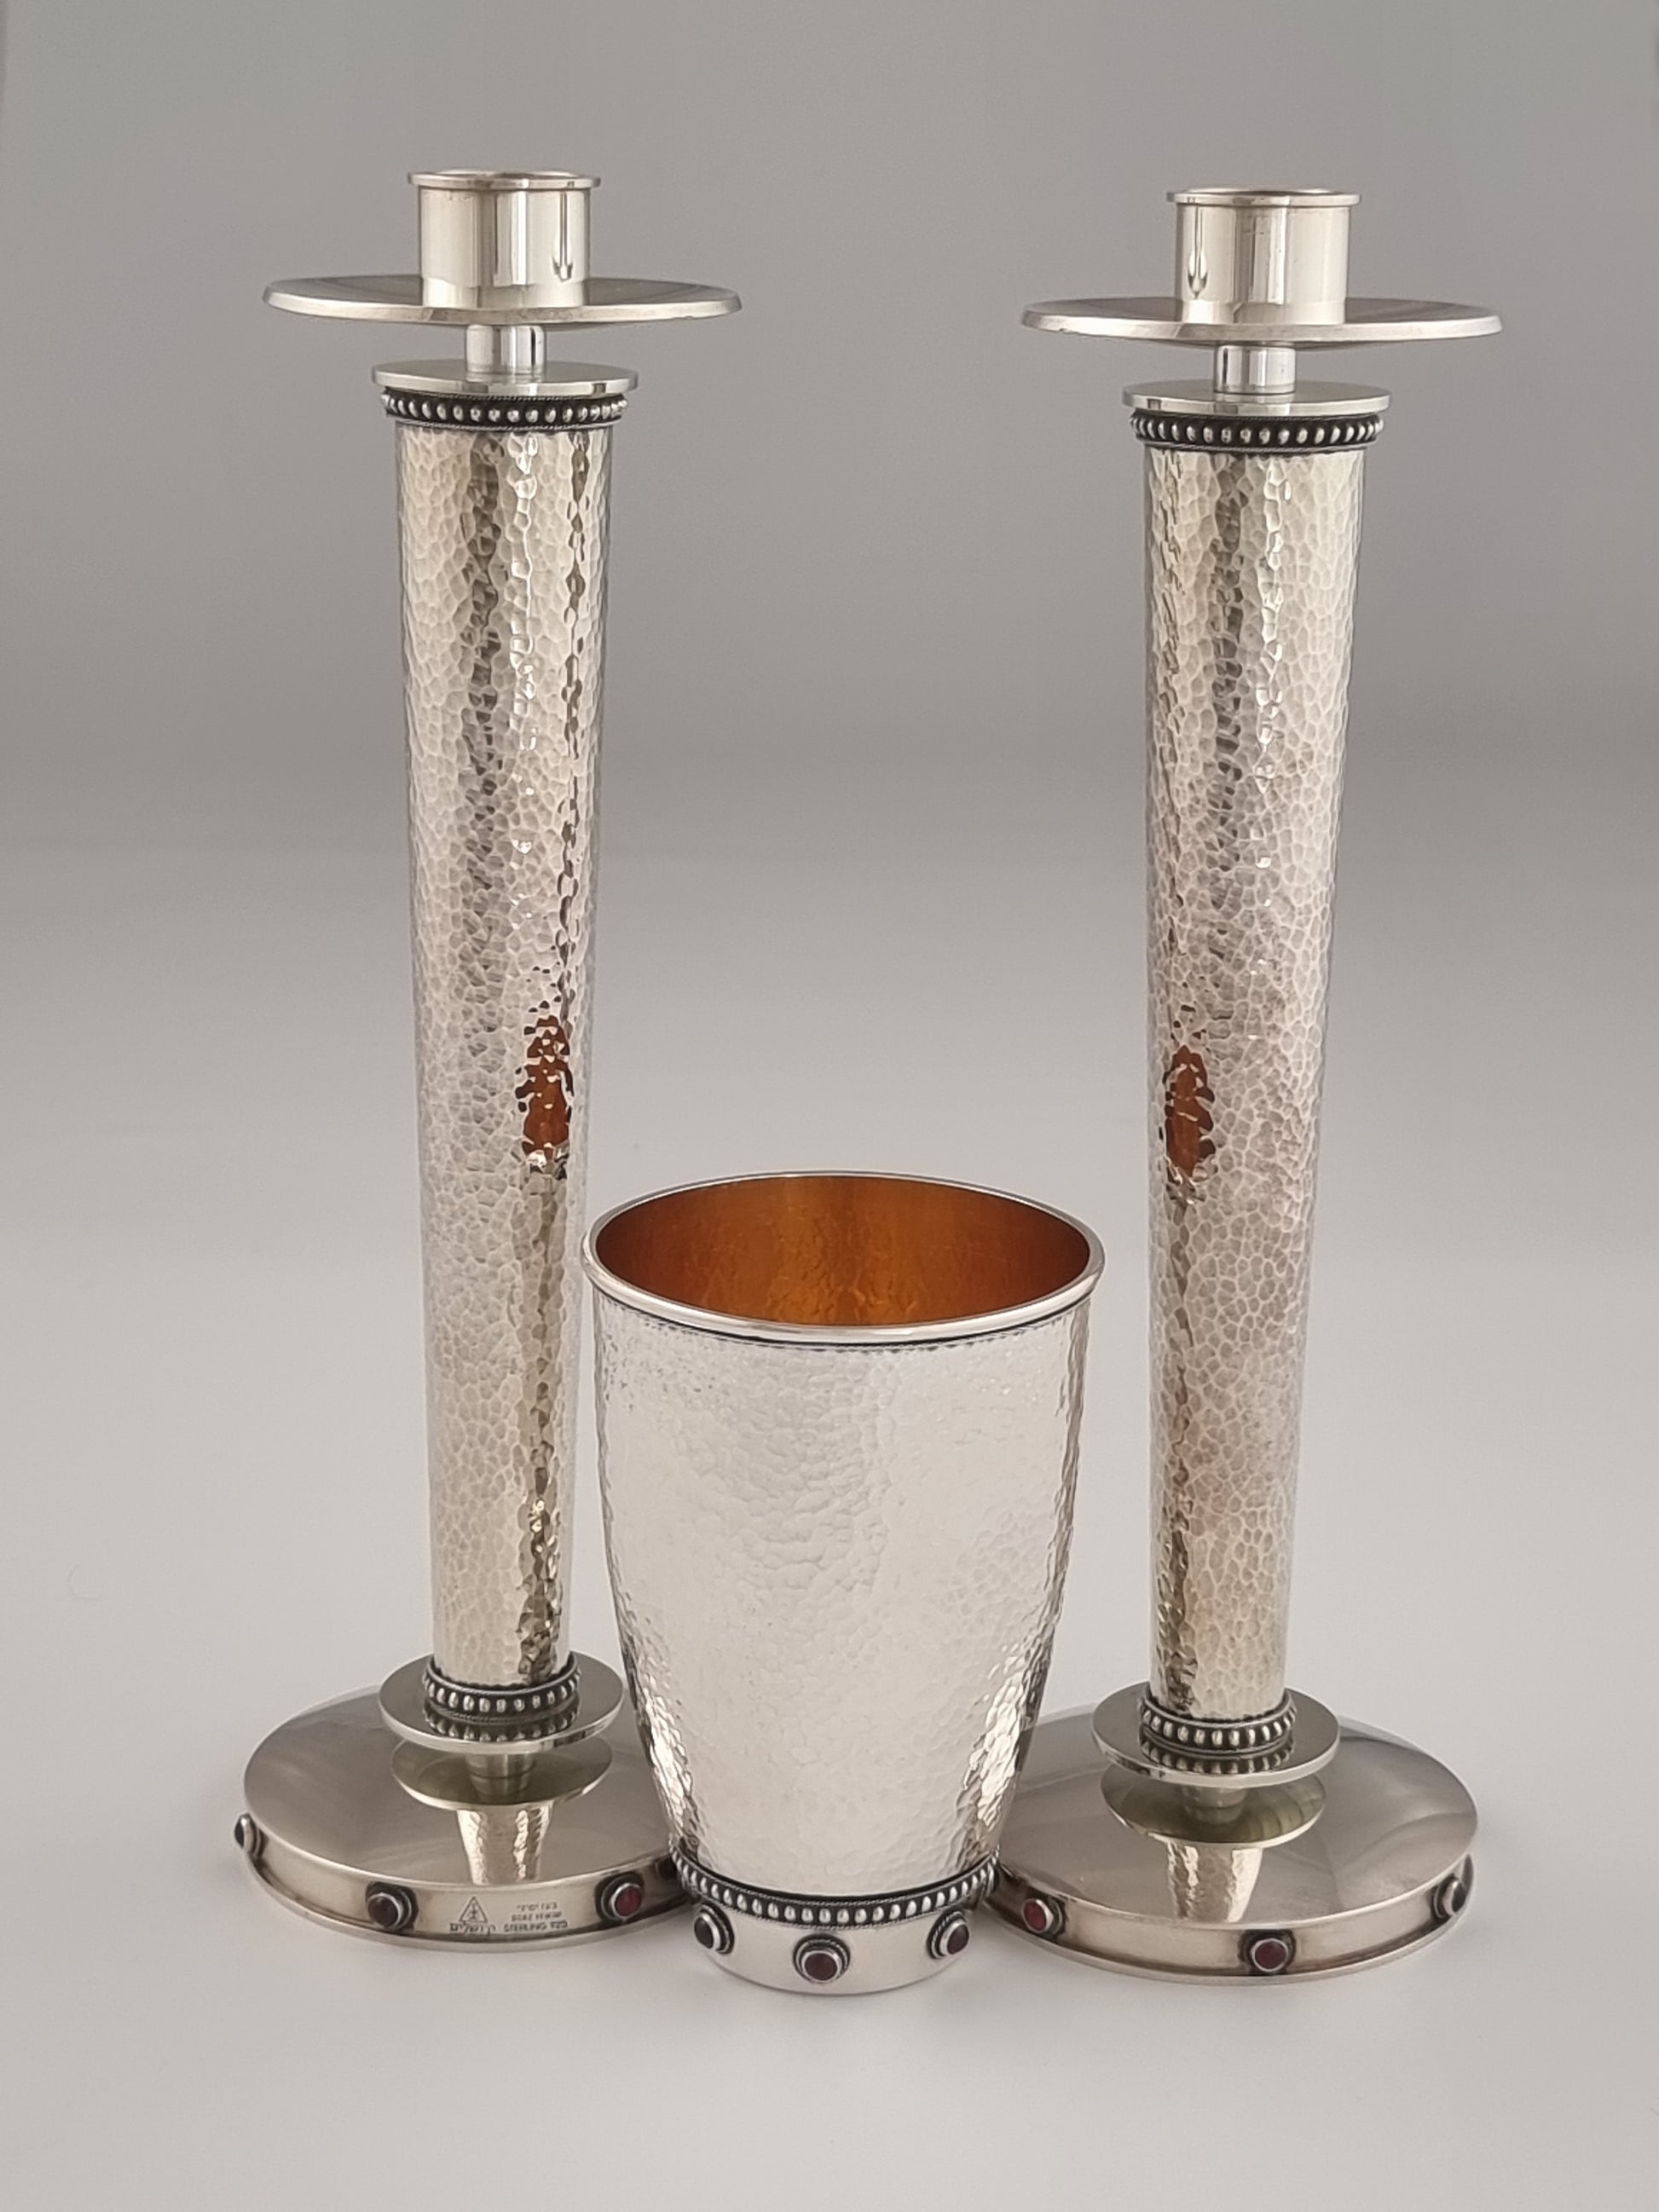 Sarah Kiddush Set. This set was designed in 1999. It is made of sterling silver, gold-plated silver, and adorned with seven garnet stones on each candlestick and ten garnet stones on the cup. The candlesticks are 10” high and the cup is 4½" high.